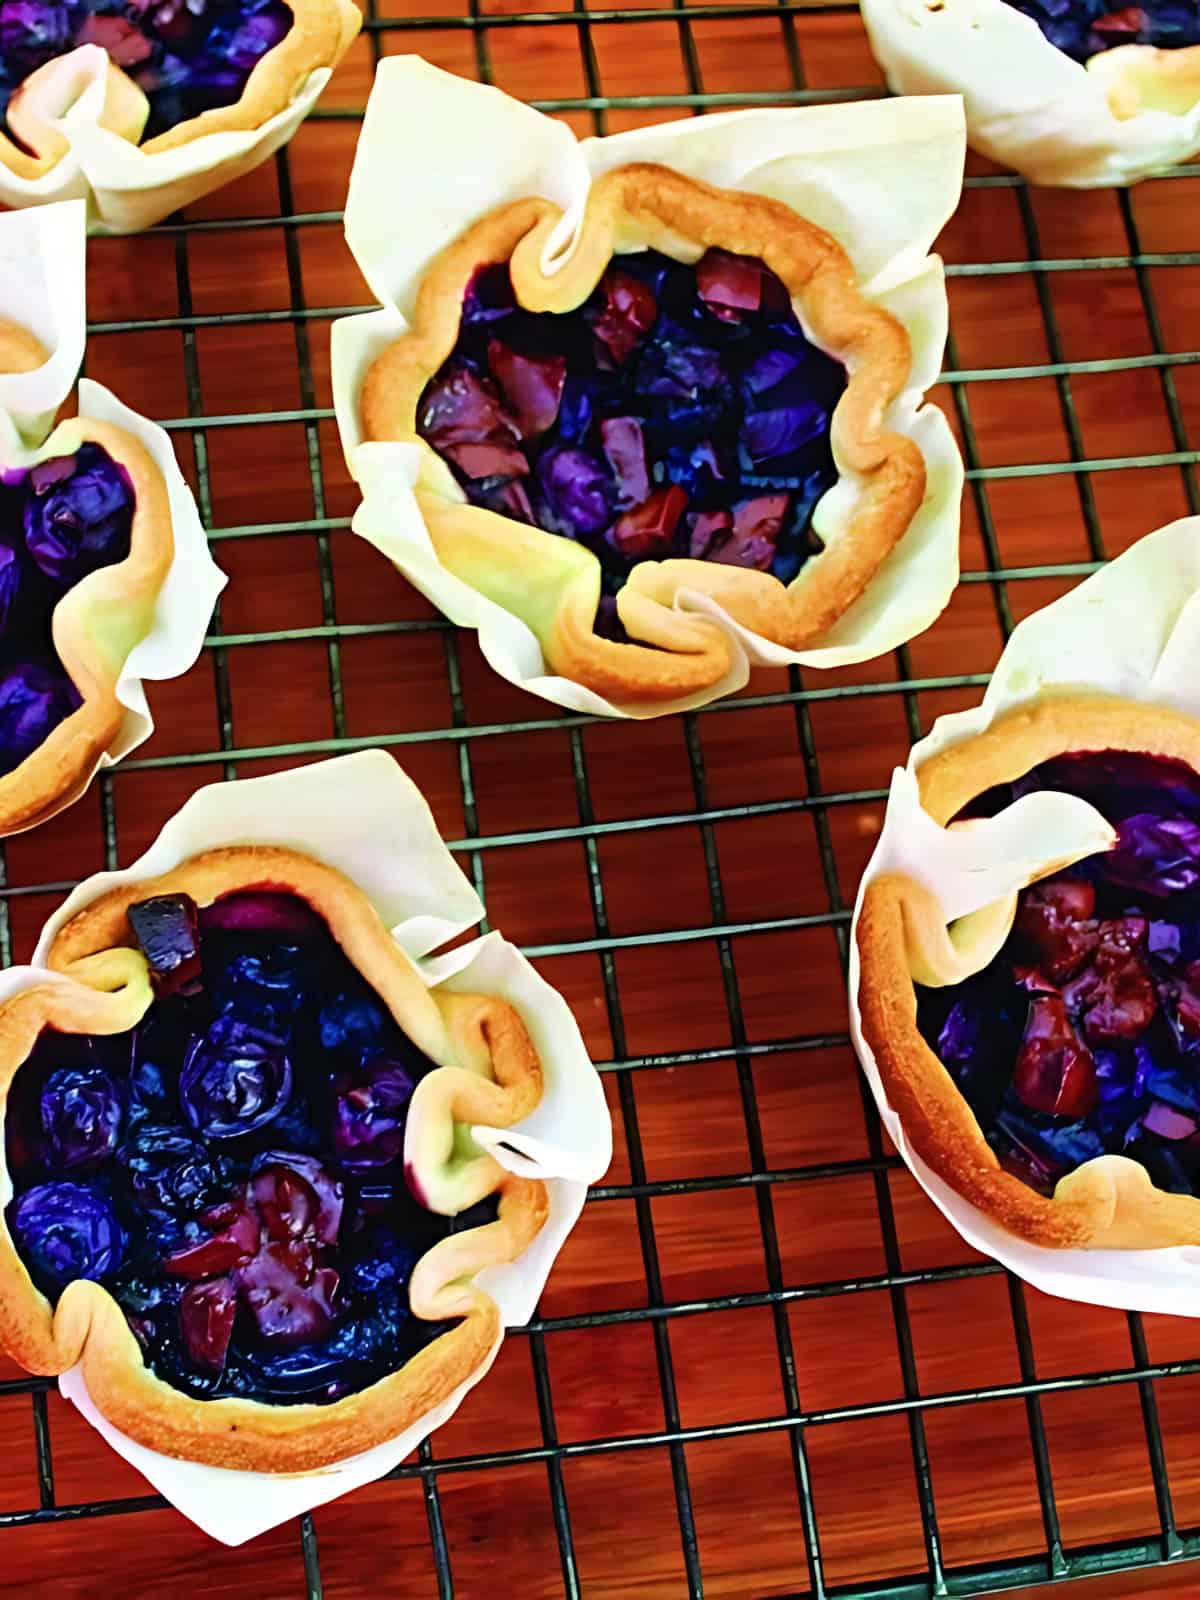 Mini blueberry and chocolate tarts fresh out of the oven on a grilled baking tray.